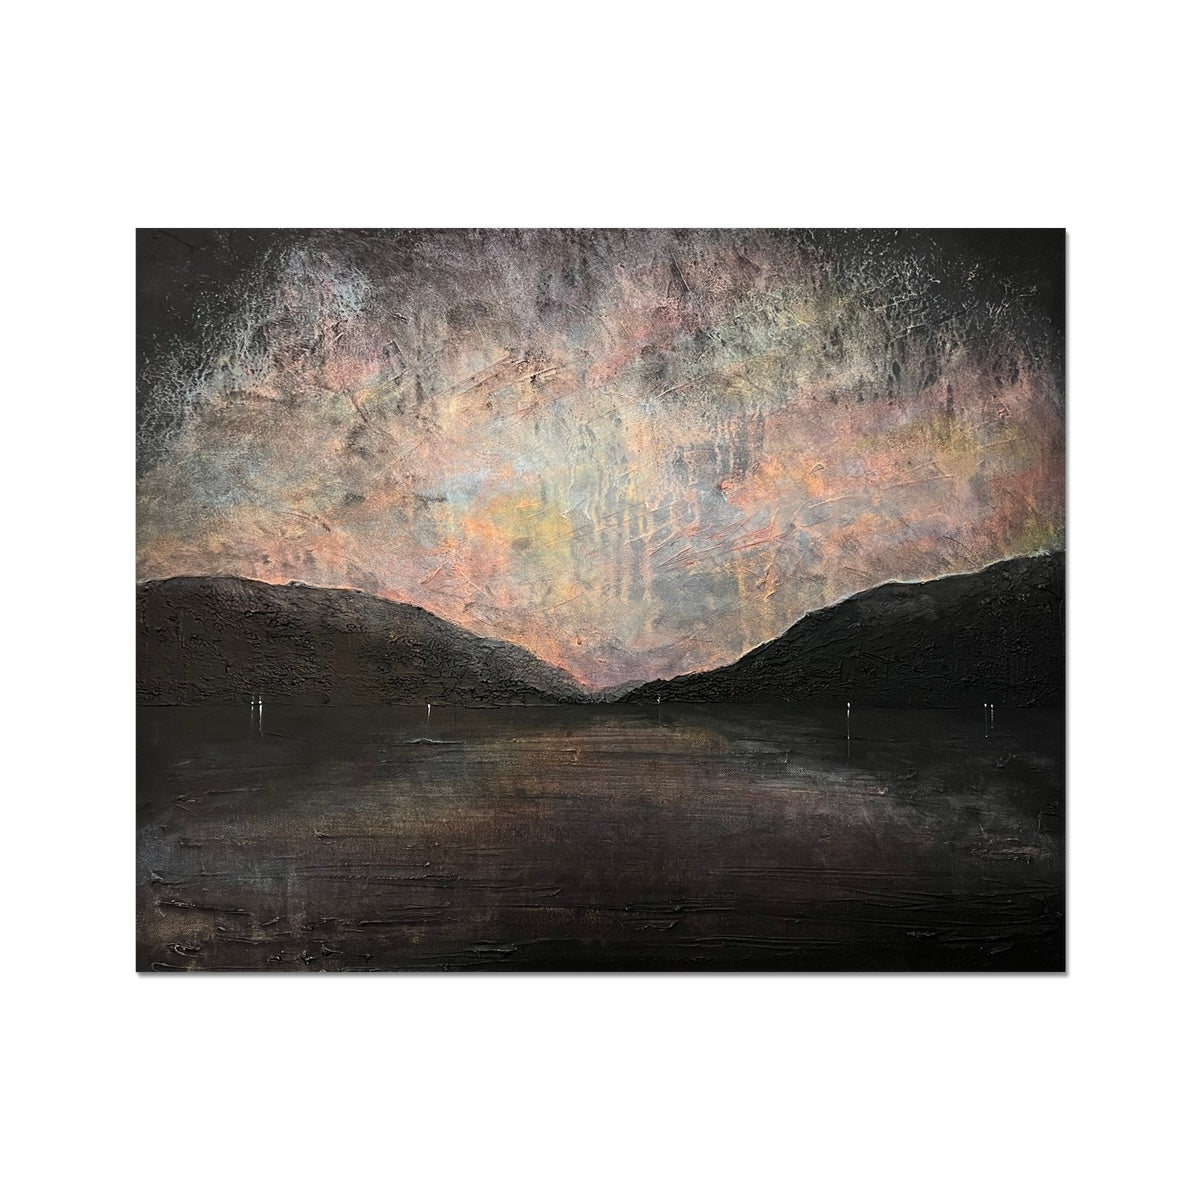 A Brooding Loch Lomond Painting | Artist Proof Collector Prints From Scotland-Artist Proof Collector Prints-Scottish Lochs & Mountains Art Gallery-20"x16"-Paintings, Prints, Homeware, Art Gifts From Scotland By Scottish Artist Kevin Hunter